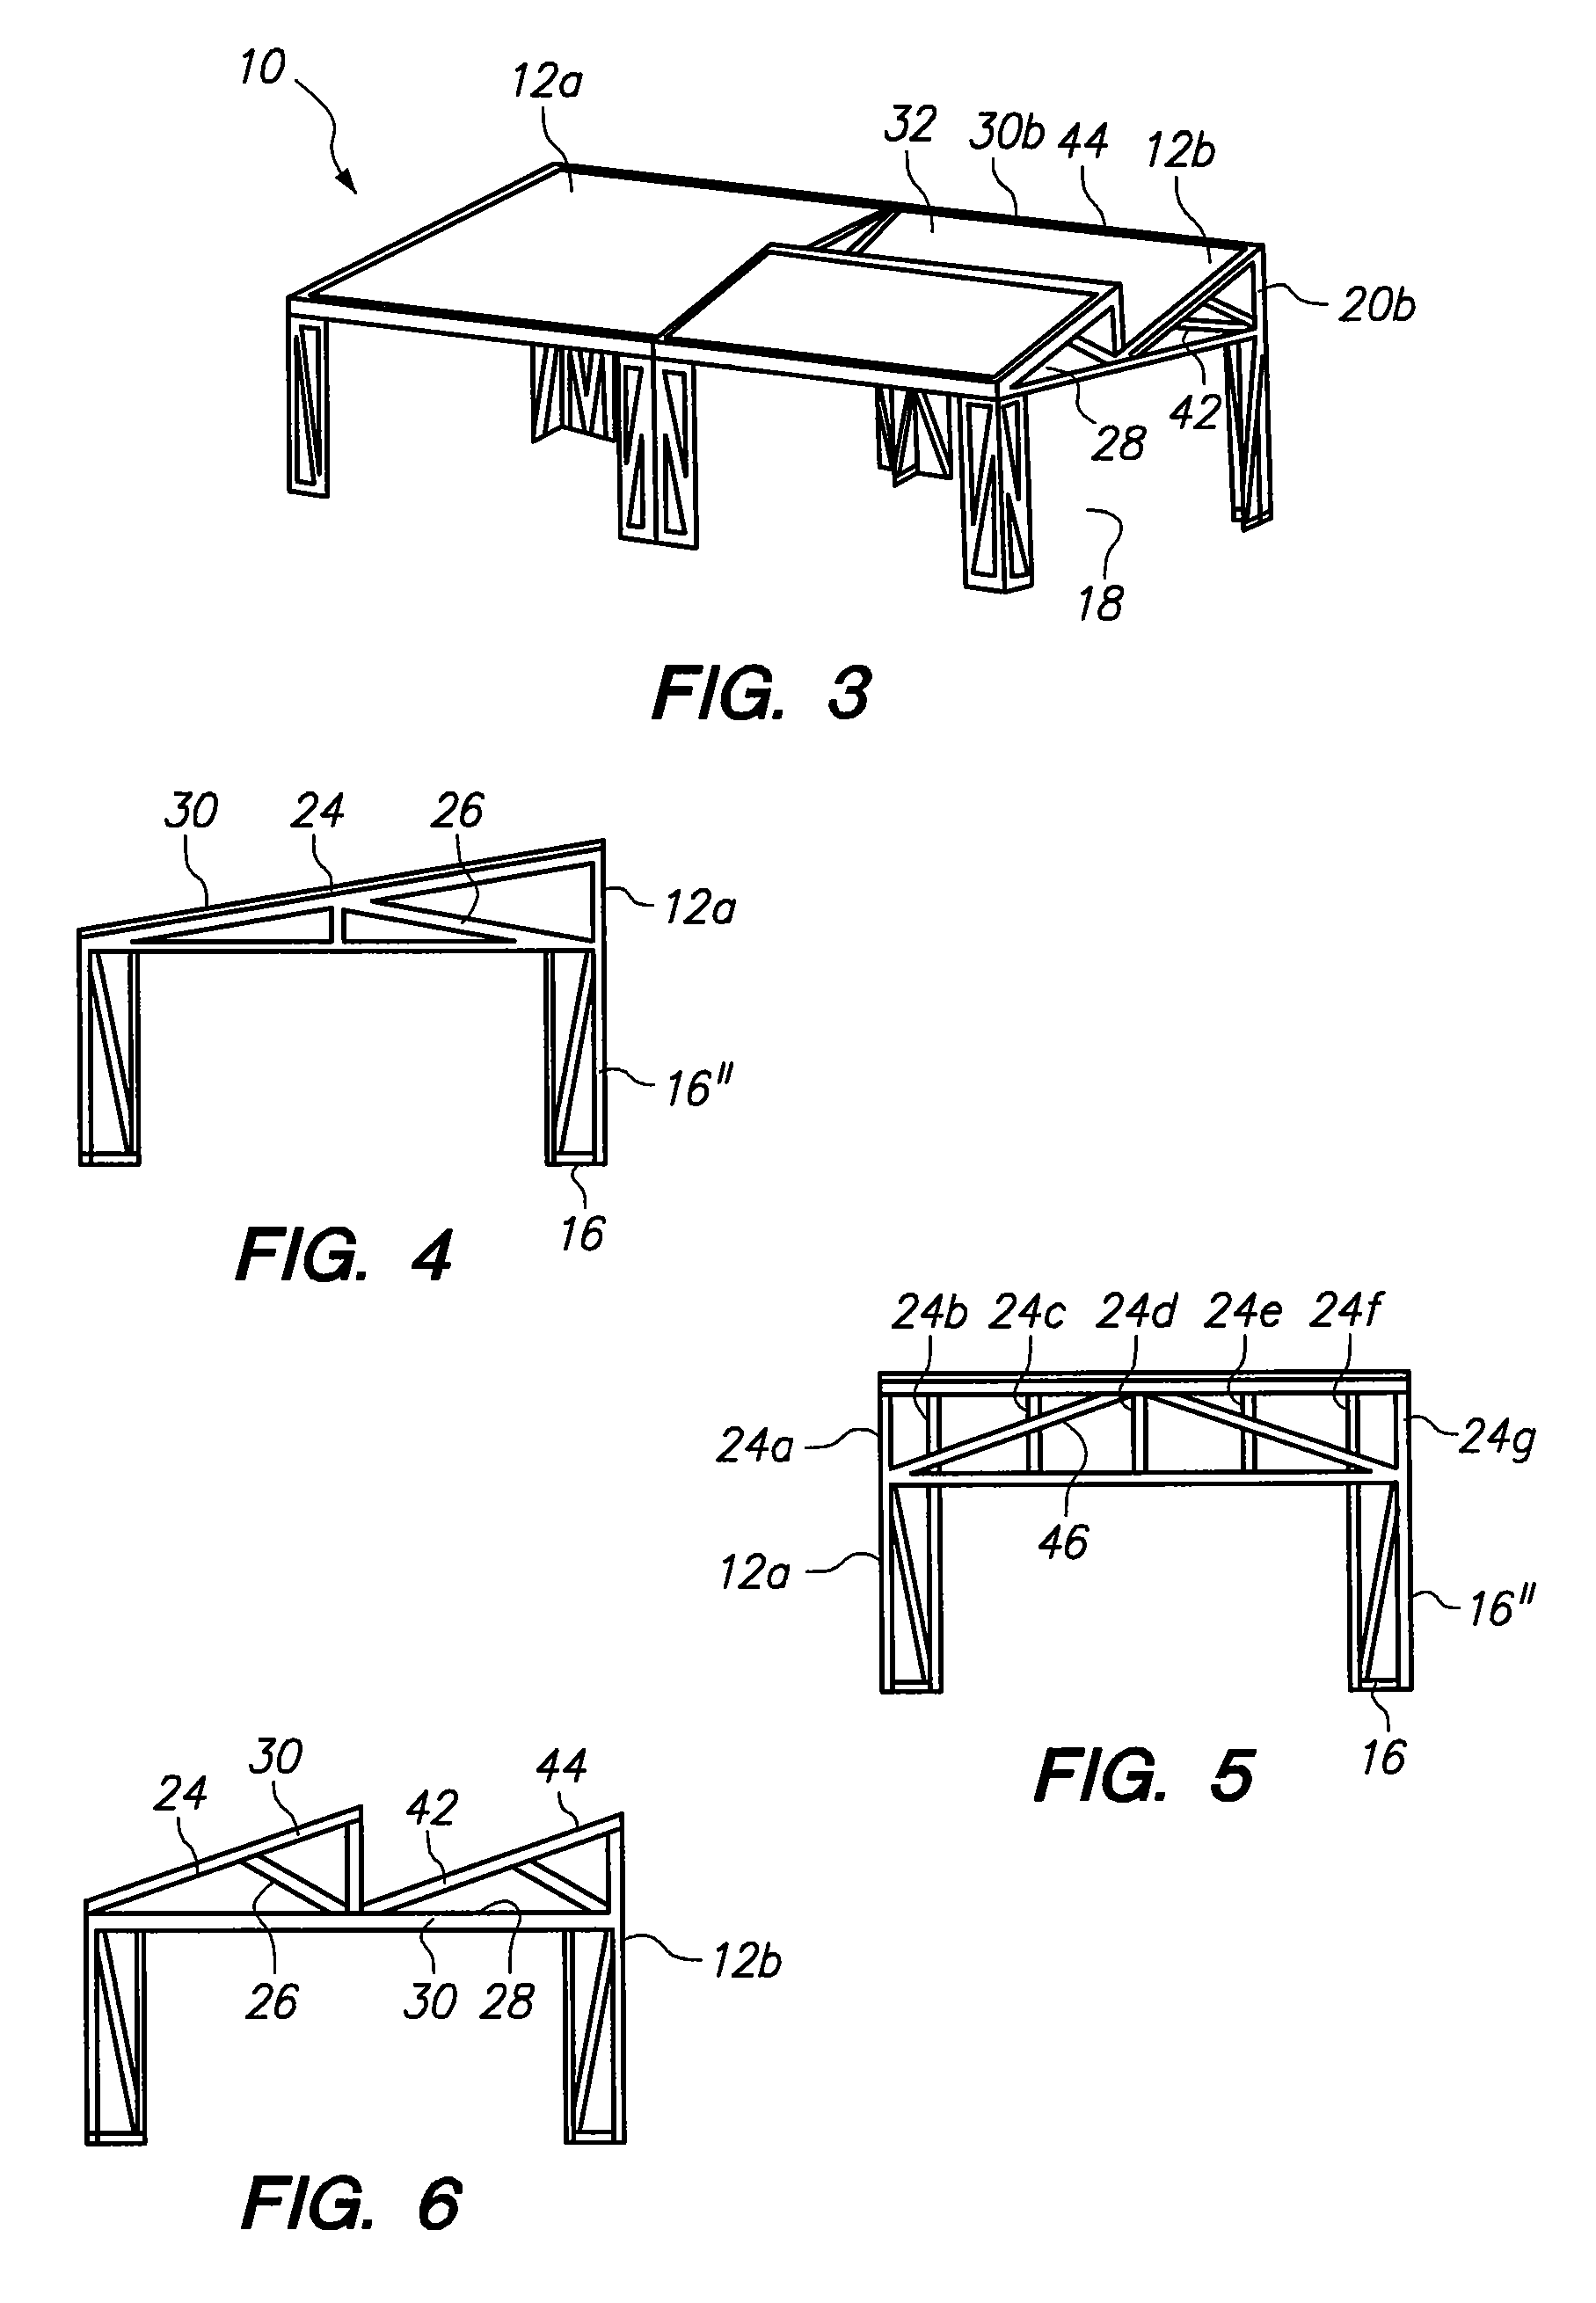 Support system for a photovoltaic system